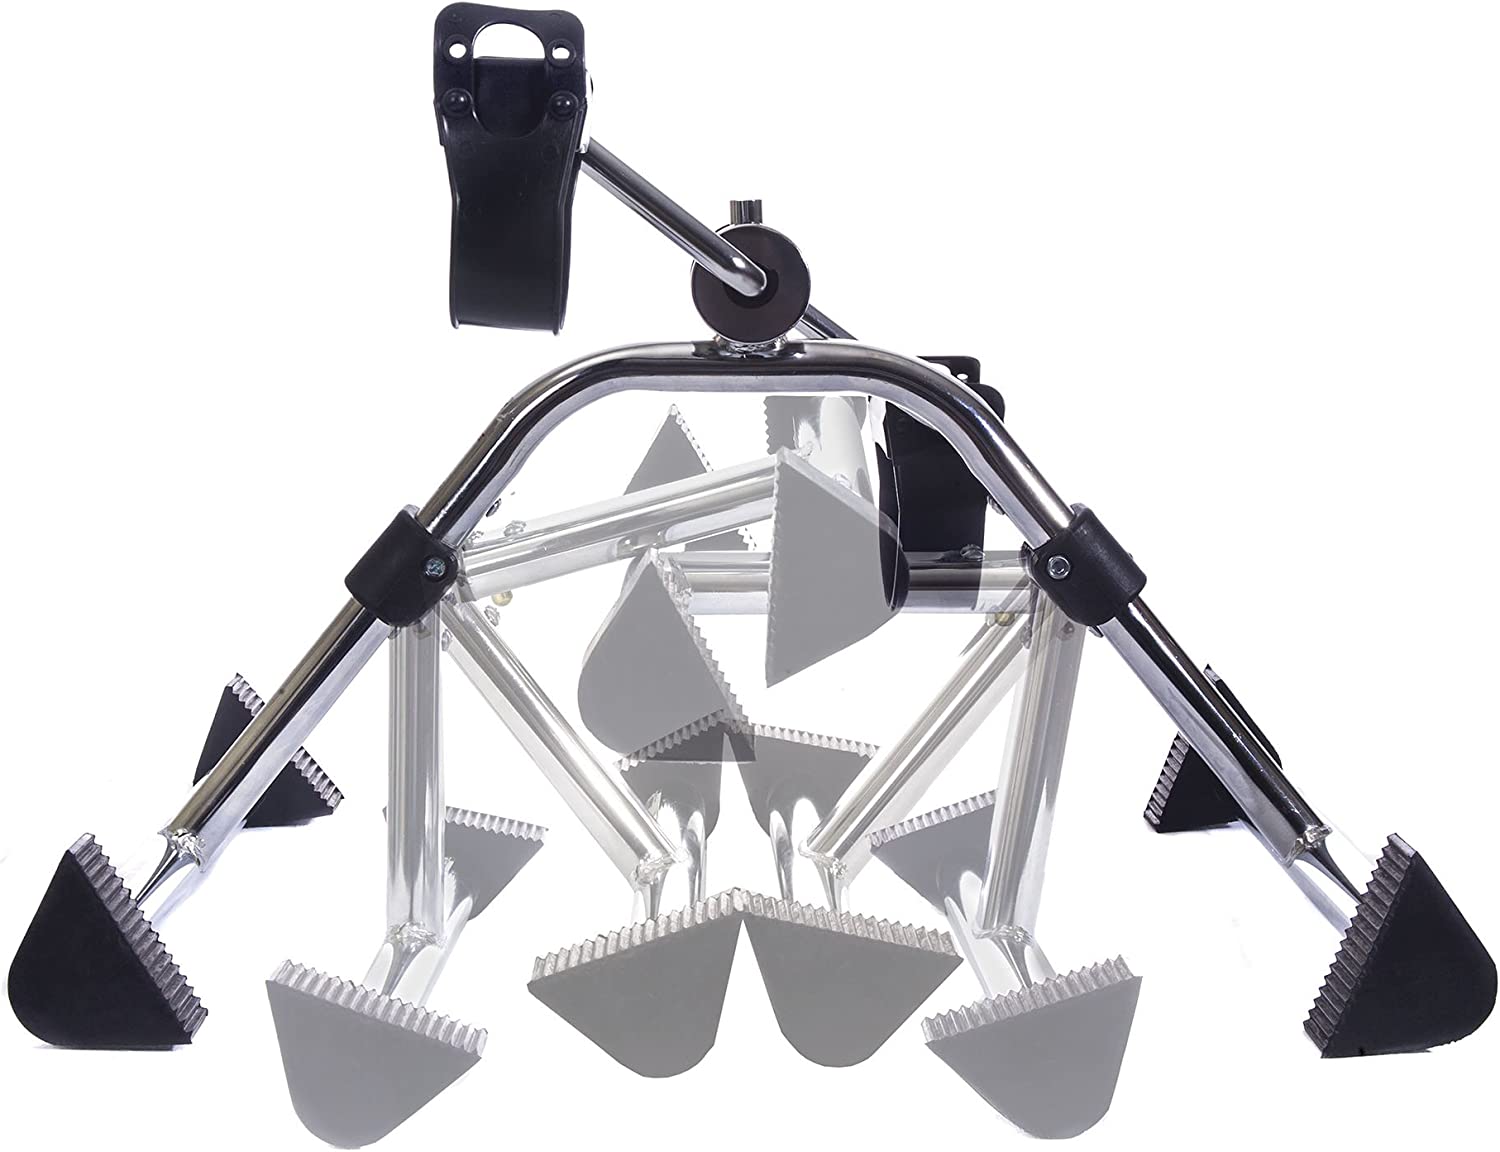 Essential Medical Supply Chrome Folding Pedal Exerciser with Adjustable Tension Knob and Flat Non Skid Pads